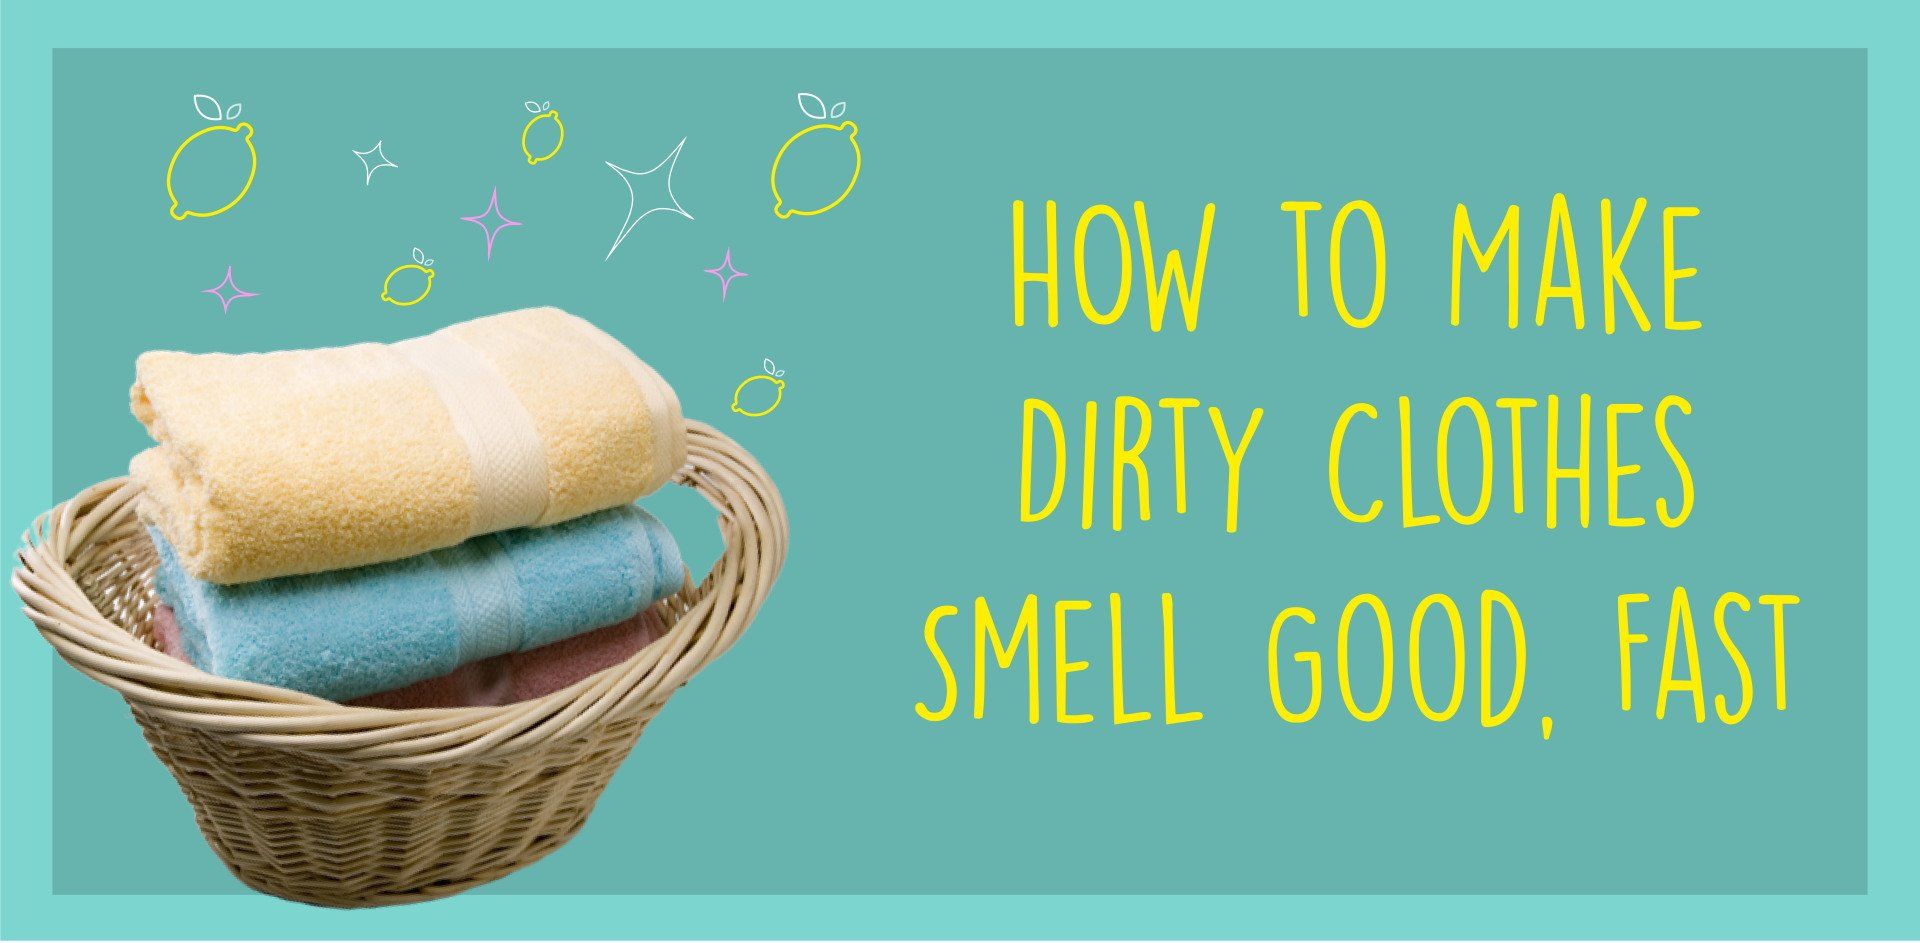 How to Make Dirty Clothes Smell Good, Fast